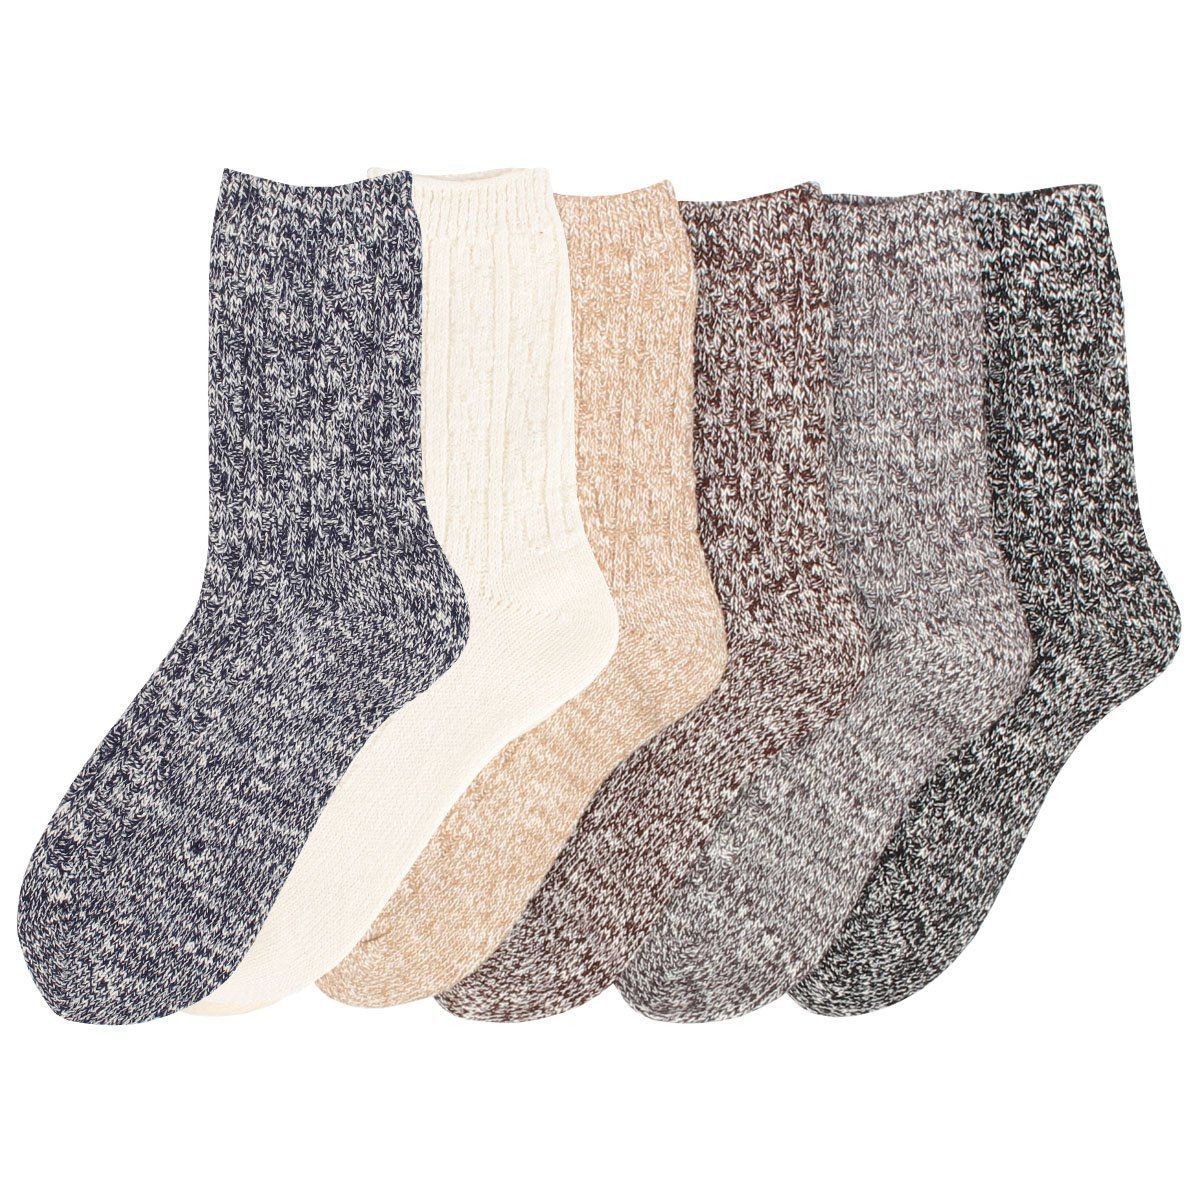 Womens 6 Pack Wool Color Fashion Warm Thick Thermal Crew Quarter Winter Socks